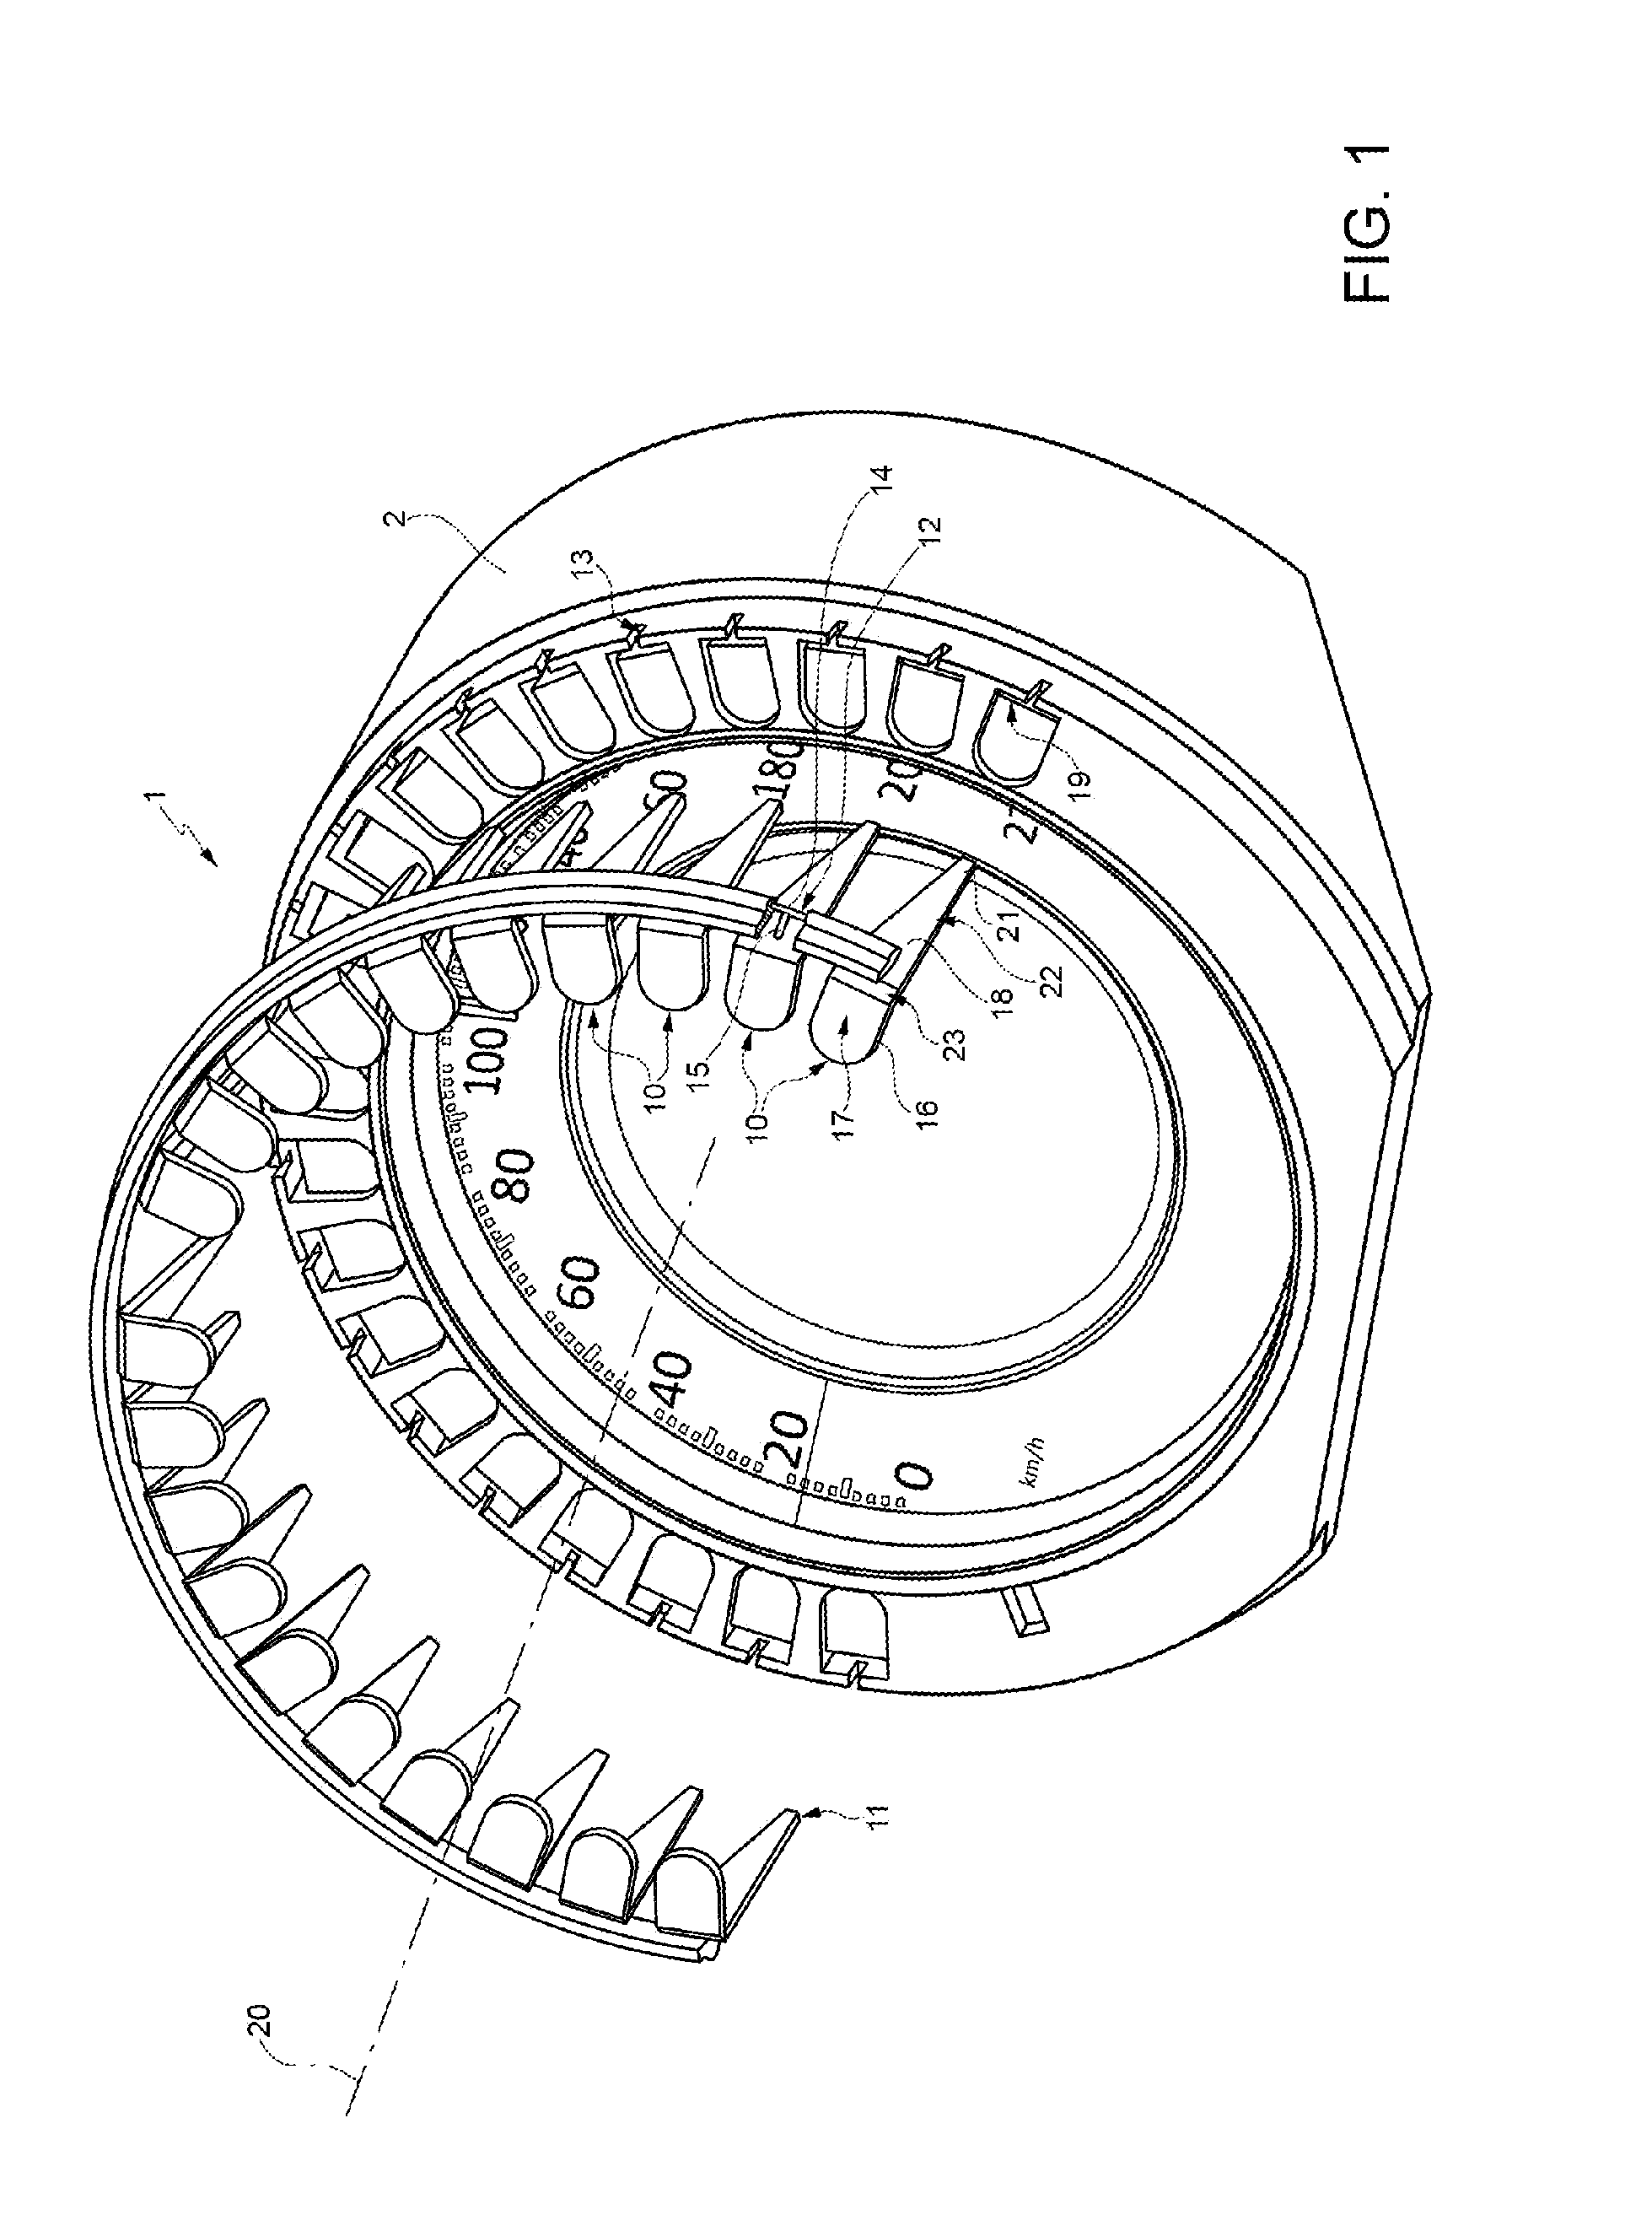 Light-guide device having a plurality of light-guide elements for a vehicle control panel